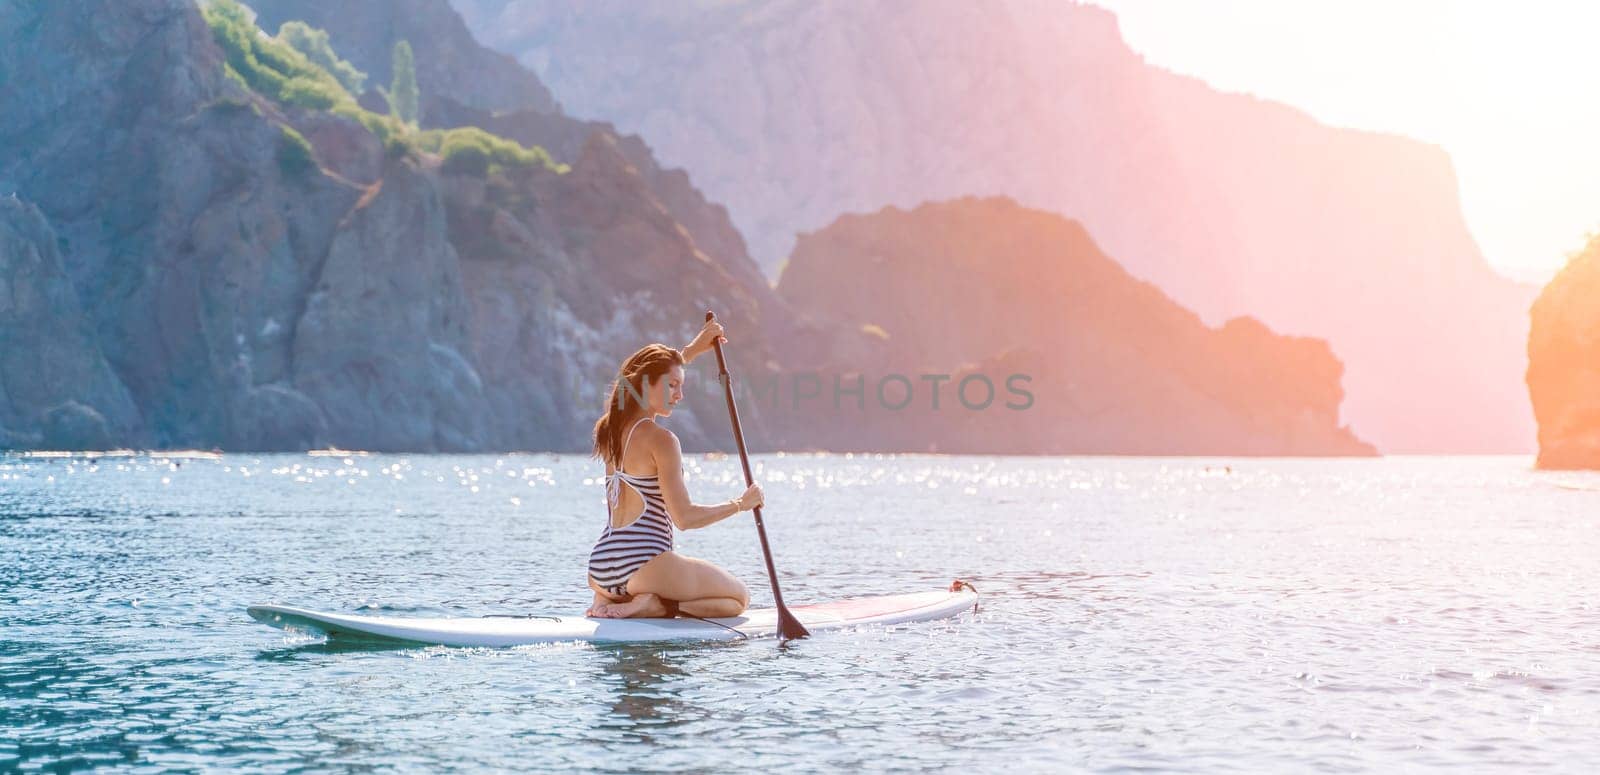 Woman summer surfing on the beach: A sporty girl in a striped swimsuit rides the waves on a surfboard on a sunny summer day at the beach, enjoying the fun and excitement of surfing. by Matiunina